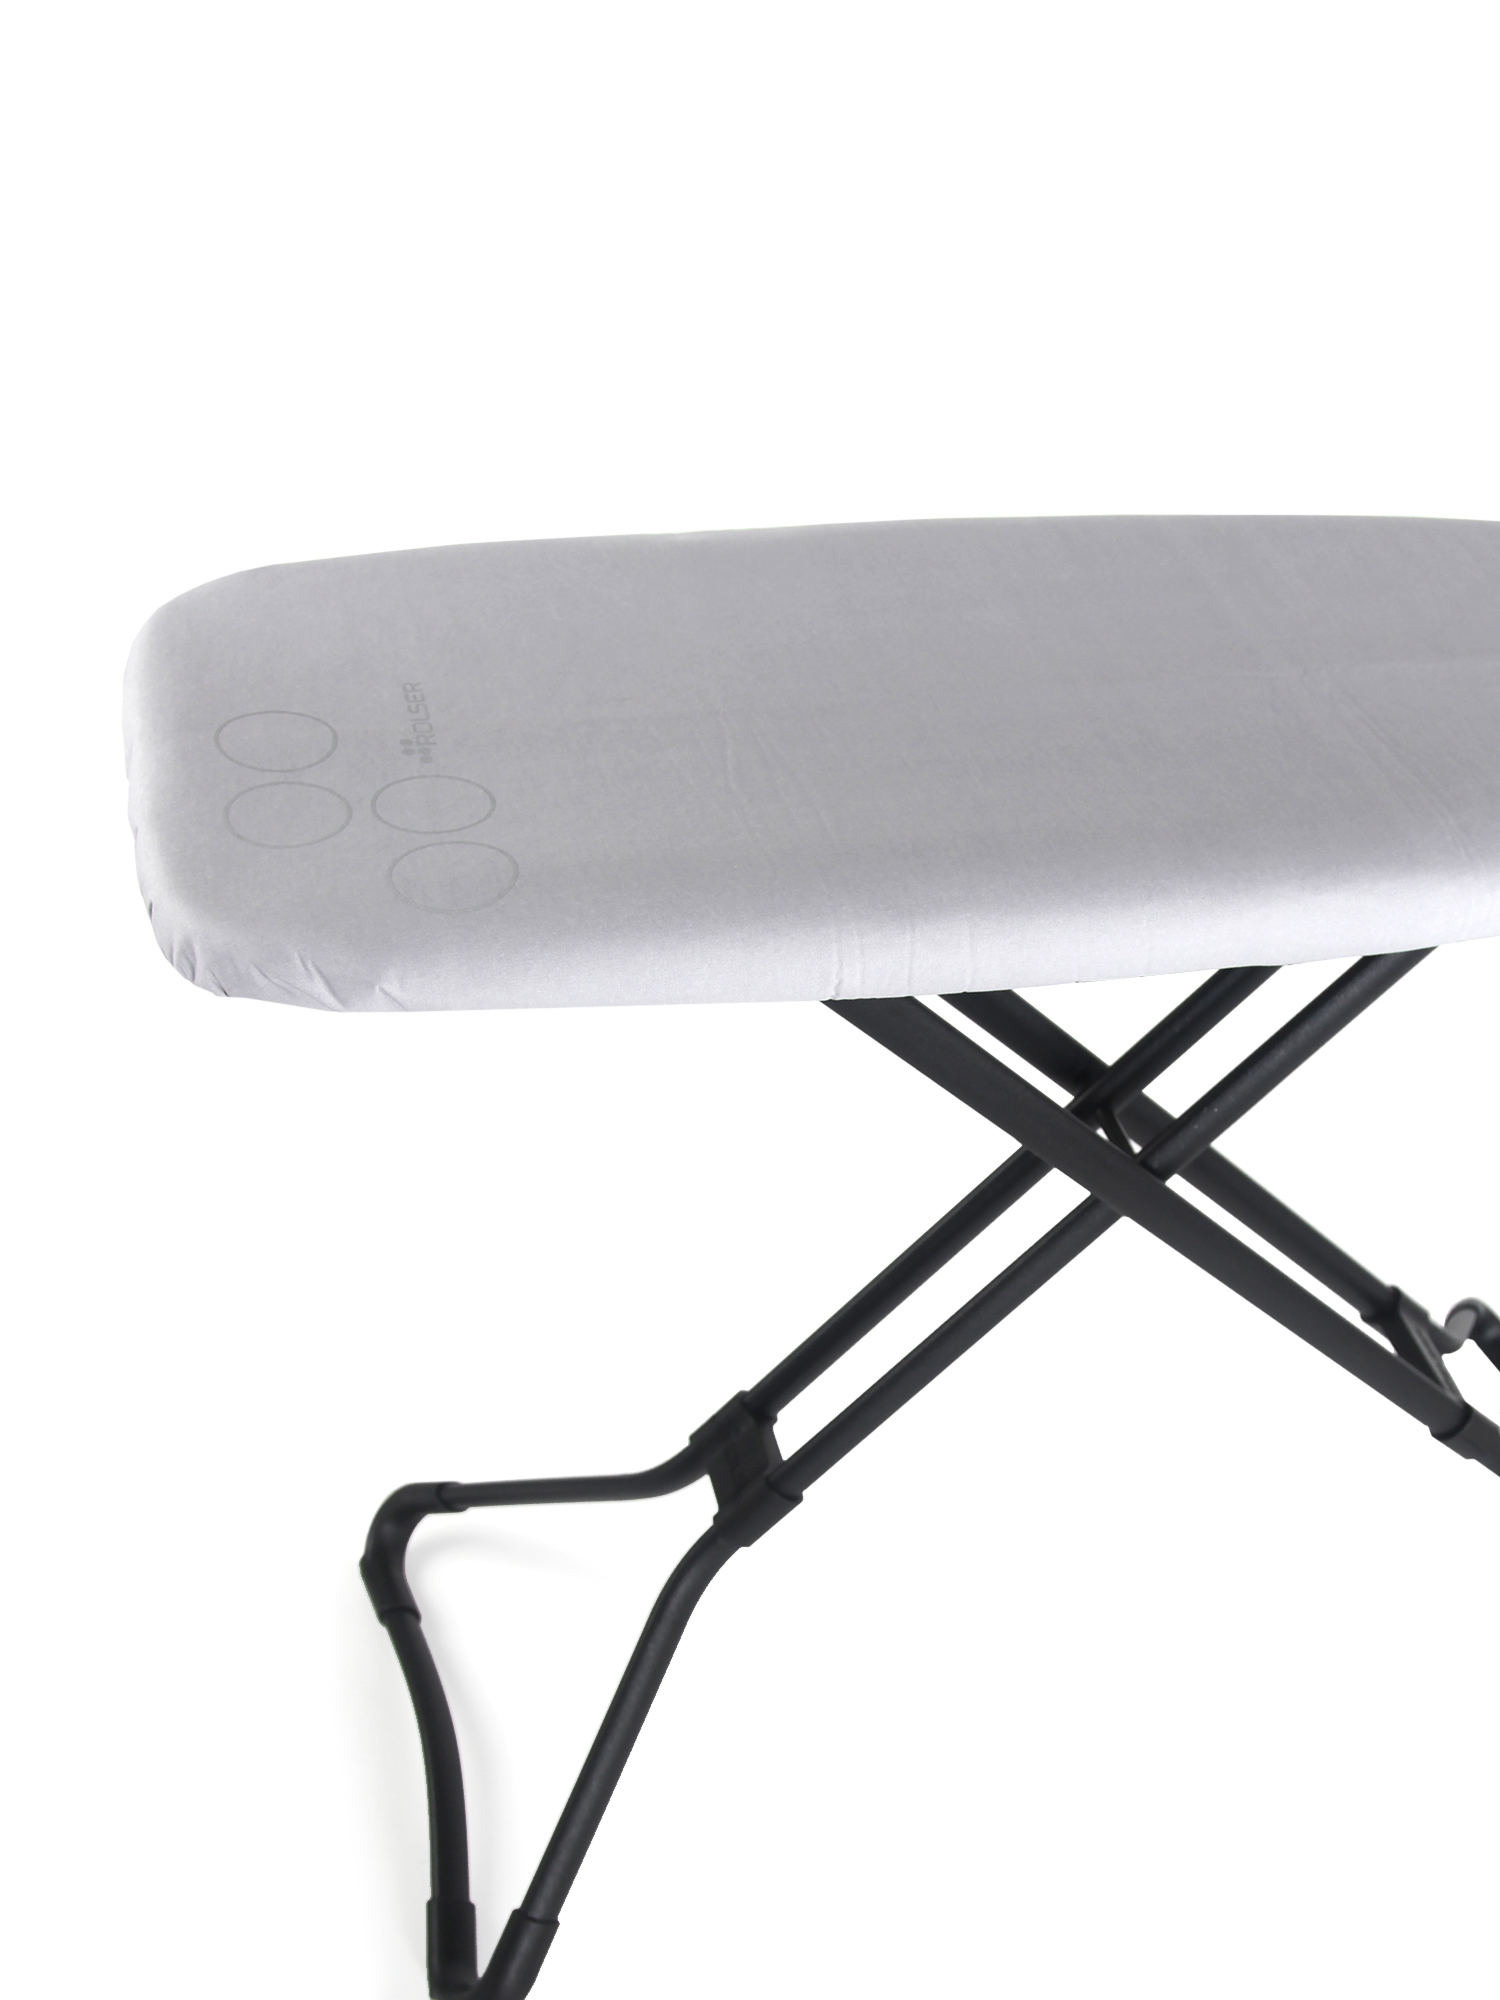 K-Surf Ironing Board Cover | 141x48 cm